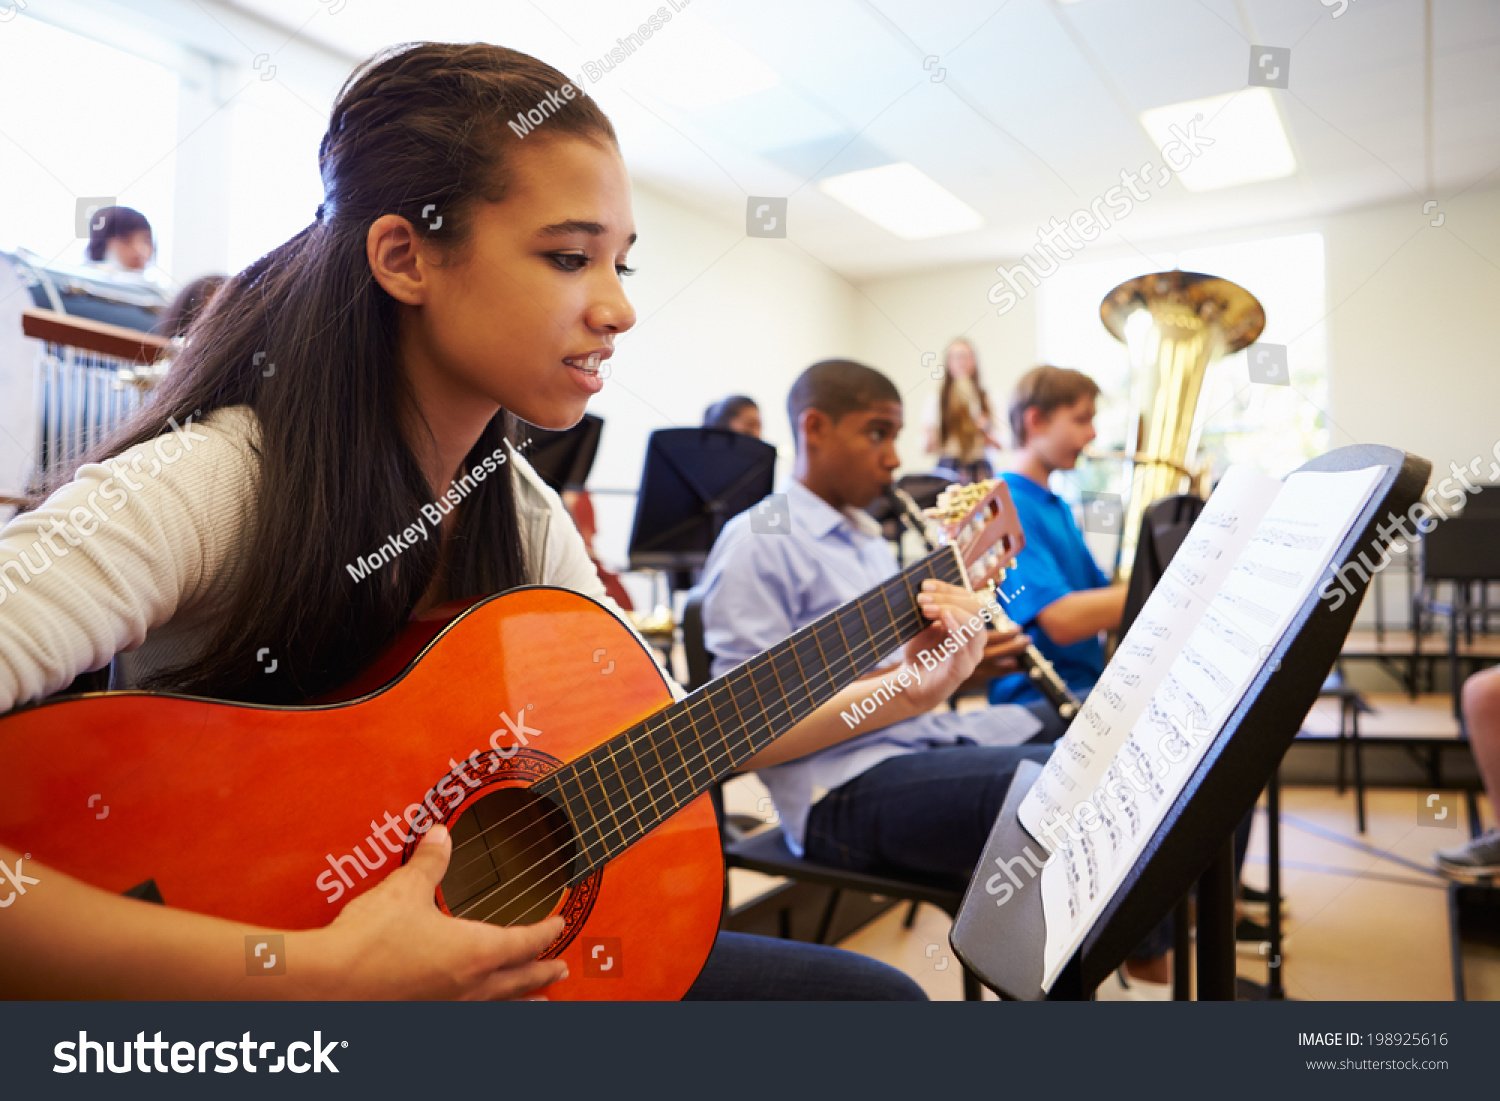 Art Theatre Music possible stock-photo-female-pupil-playing-guitar-in-high-school-orchestra-198925616.jpg